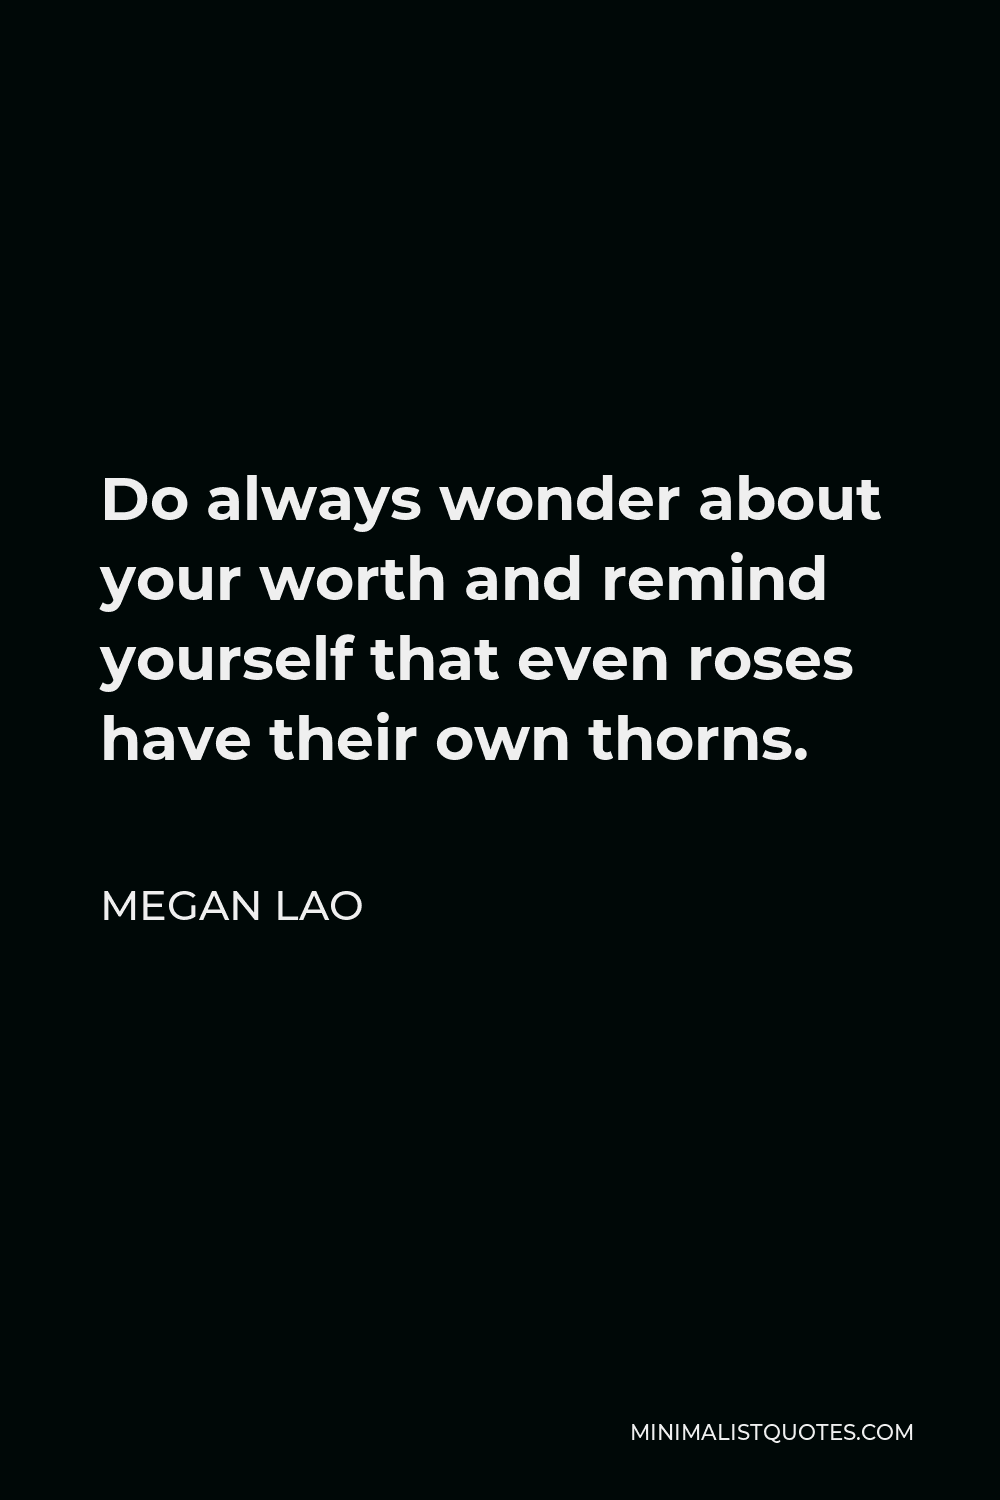 Megan Lao Quote - Do always wonder about your worth and remind yourself that even roses have their own thorns.